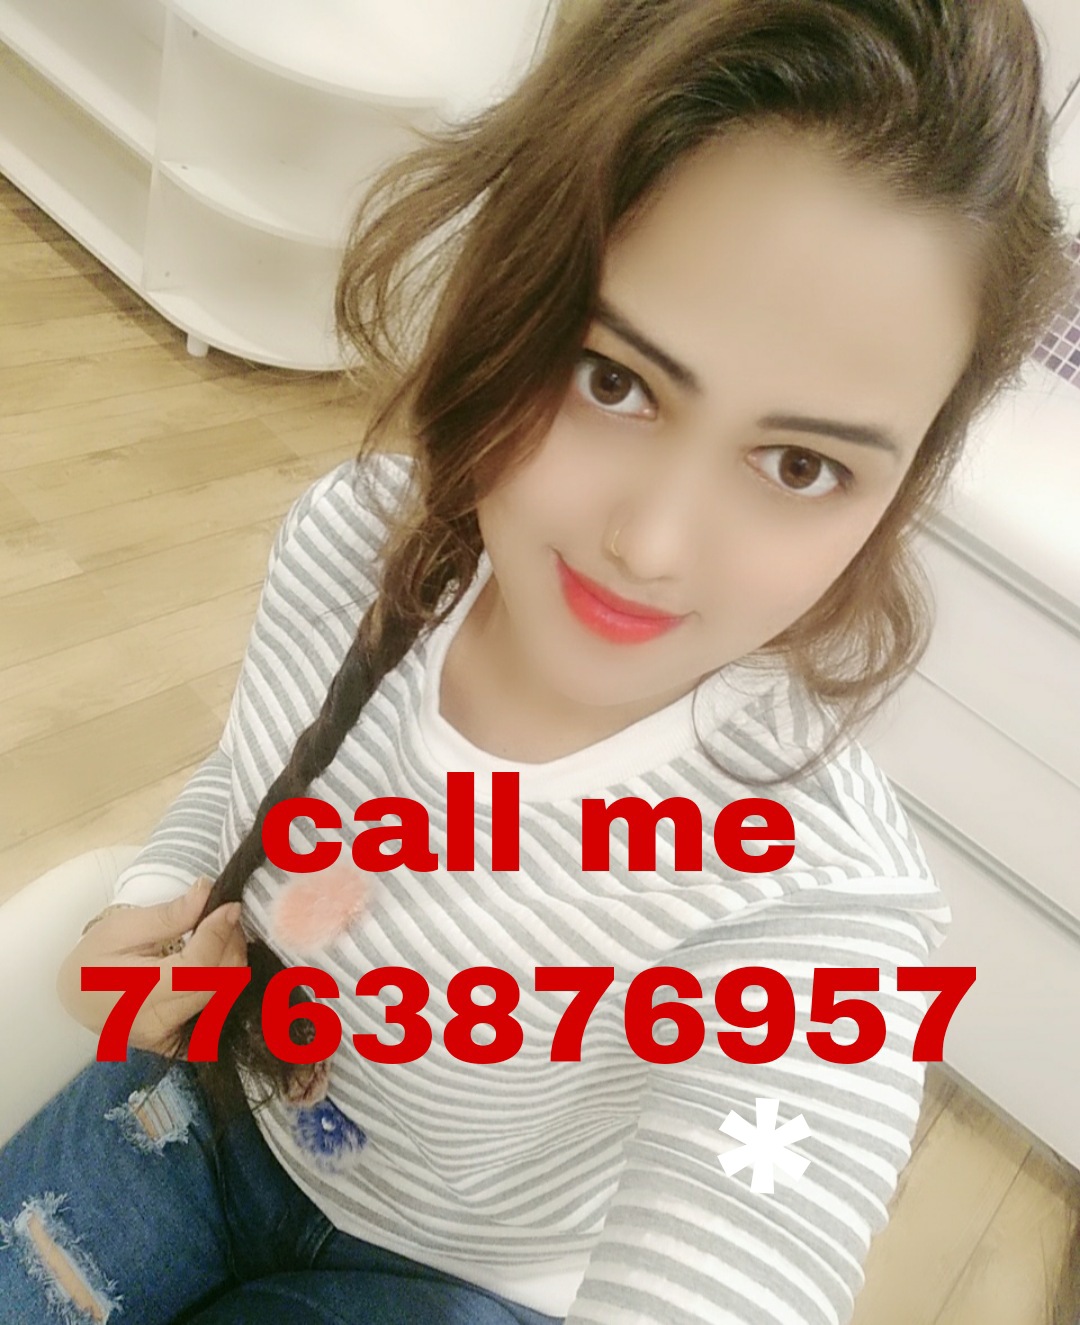 VIKARABAD CALL GIRL LOW PRICE CASH PAYMENT SERVICE AVAILABLE 